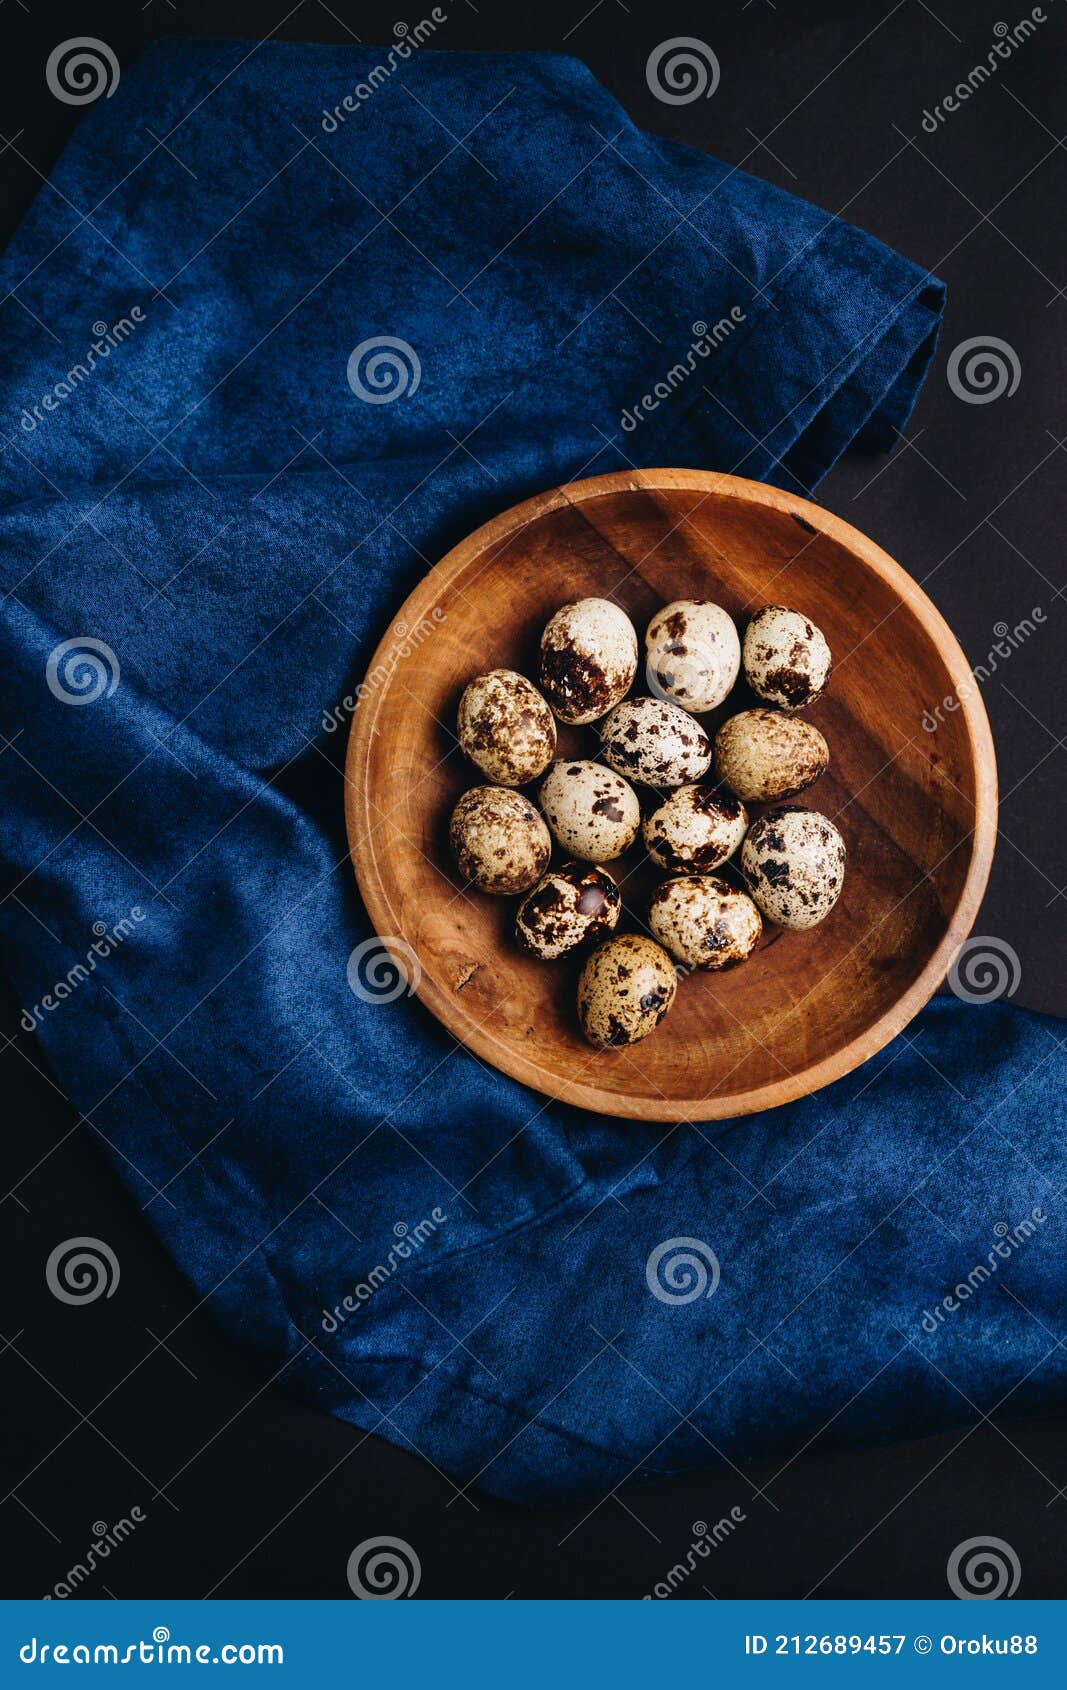 minimal art of fresh quail eggs in the wooden bowl on the dark background with blue saten or silk around